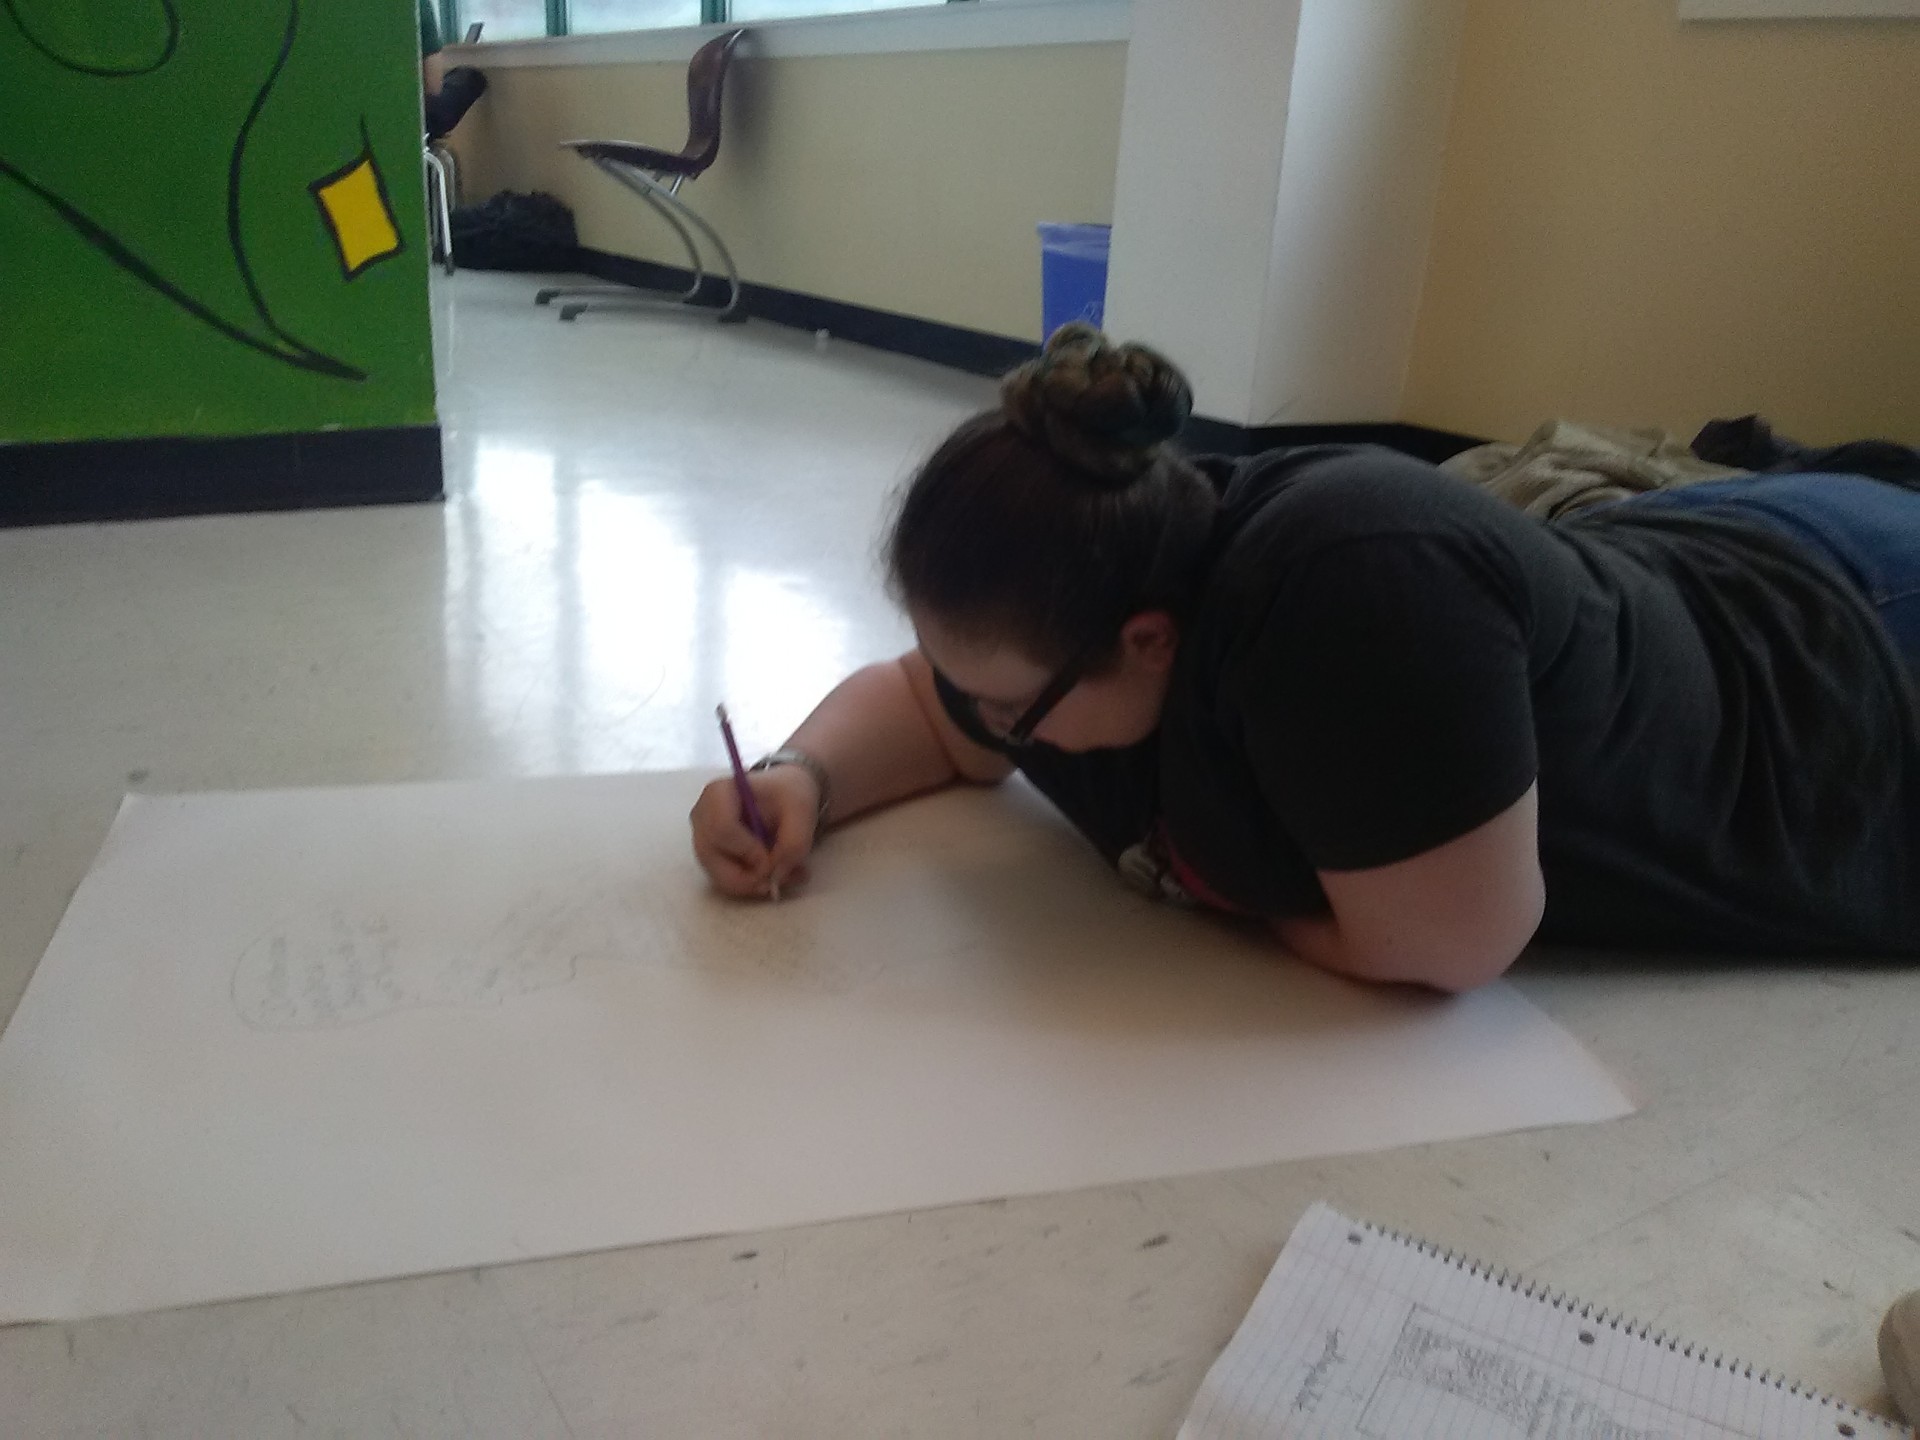 This is me working on my poster for the Agent of Change.